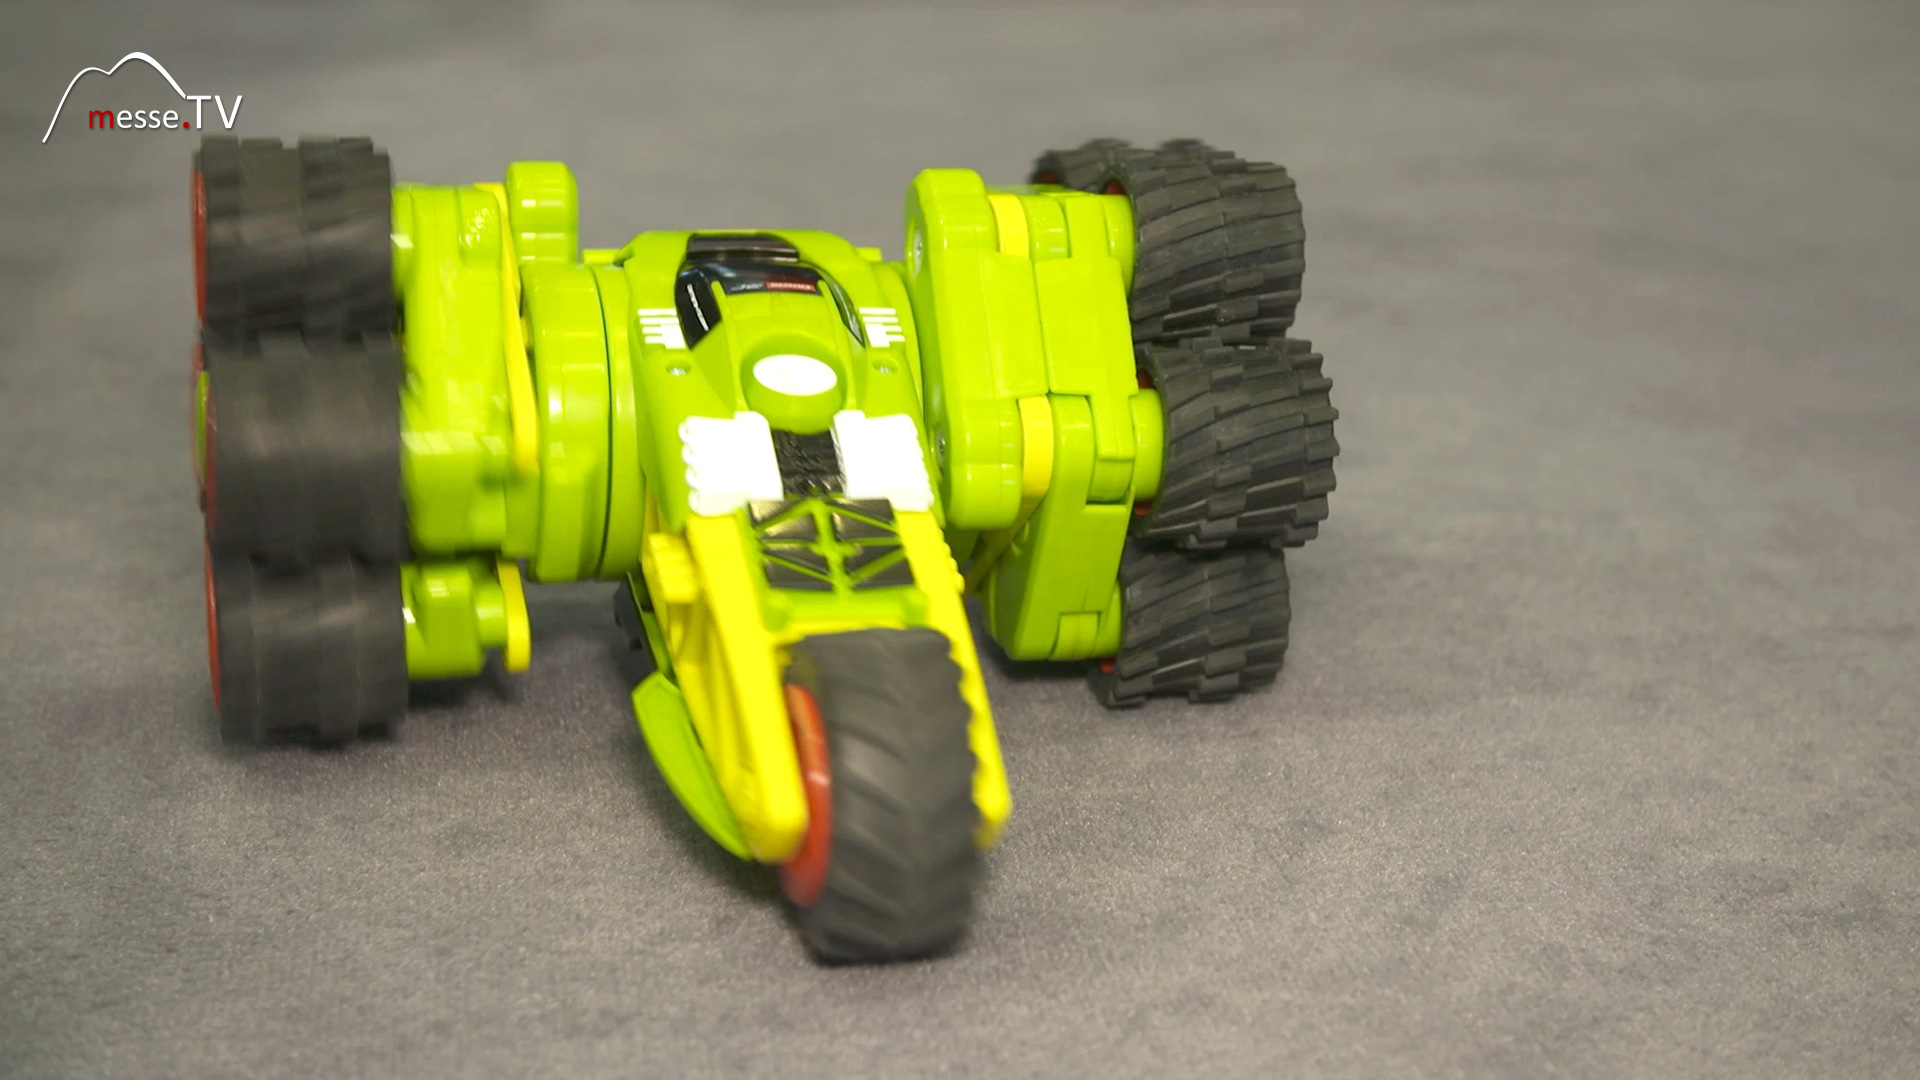 Powersnake remote controlled compact CarreraRC toy fair